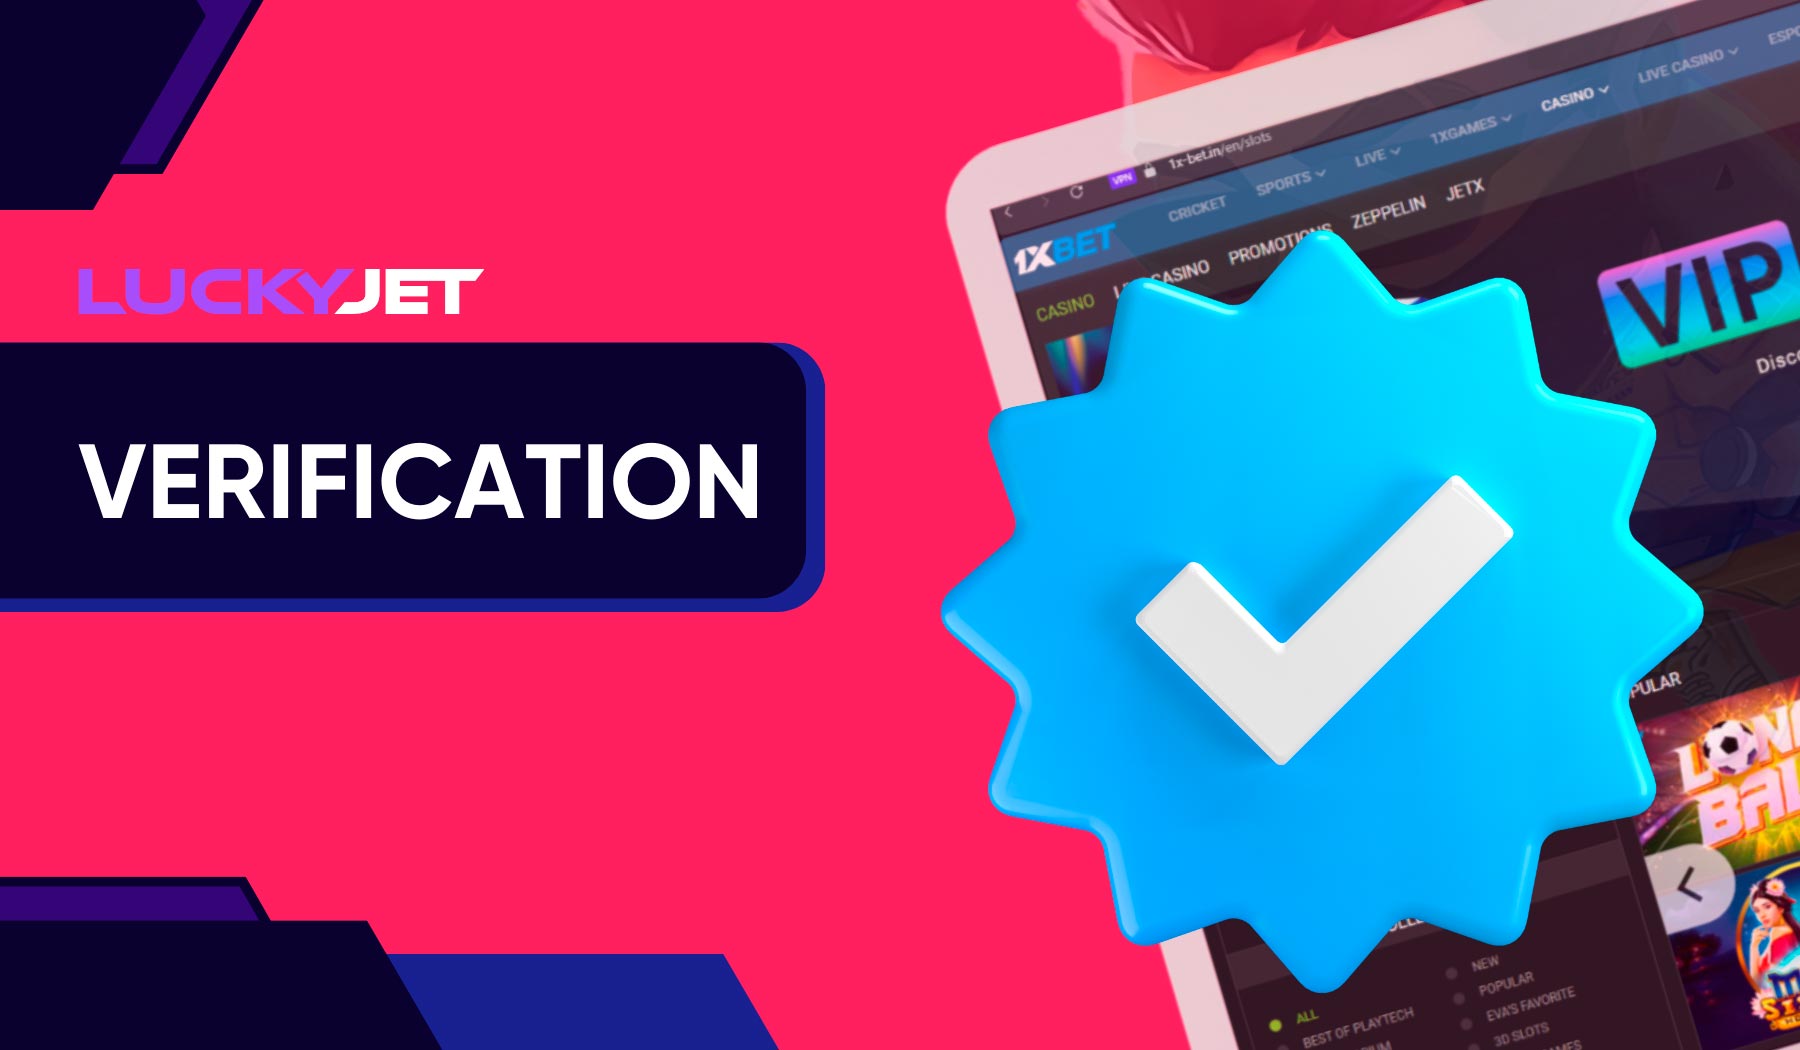 For Lucky Jet players on the 1xbet platform, the verification process